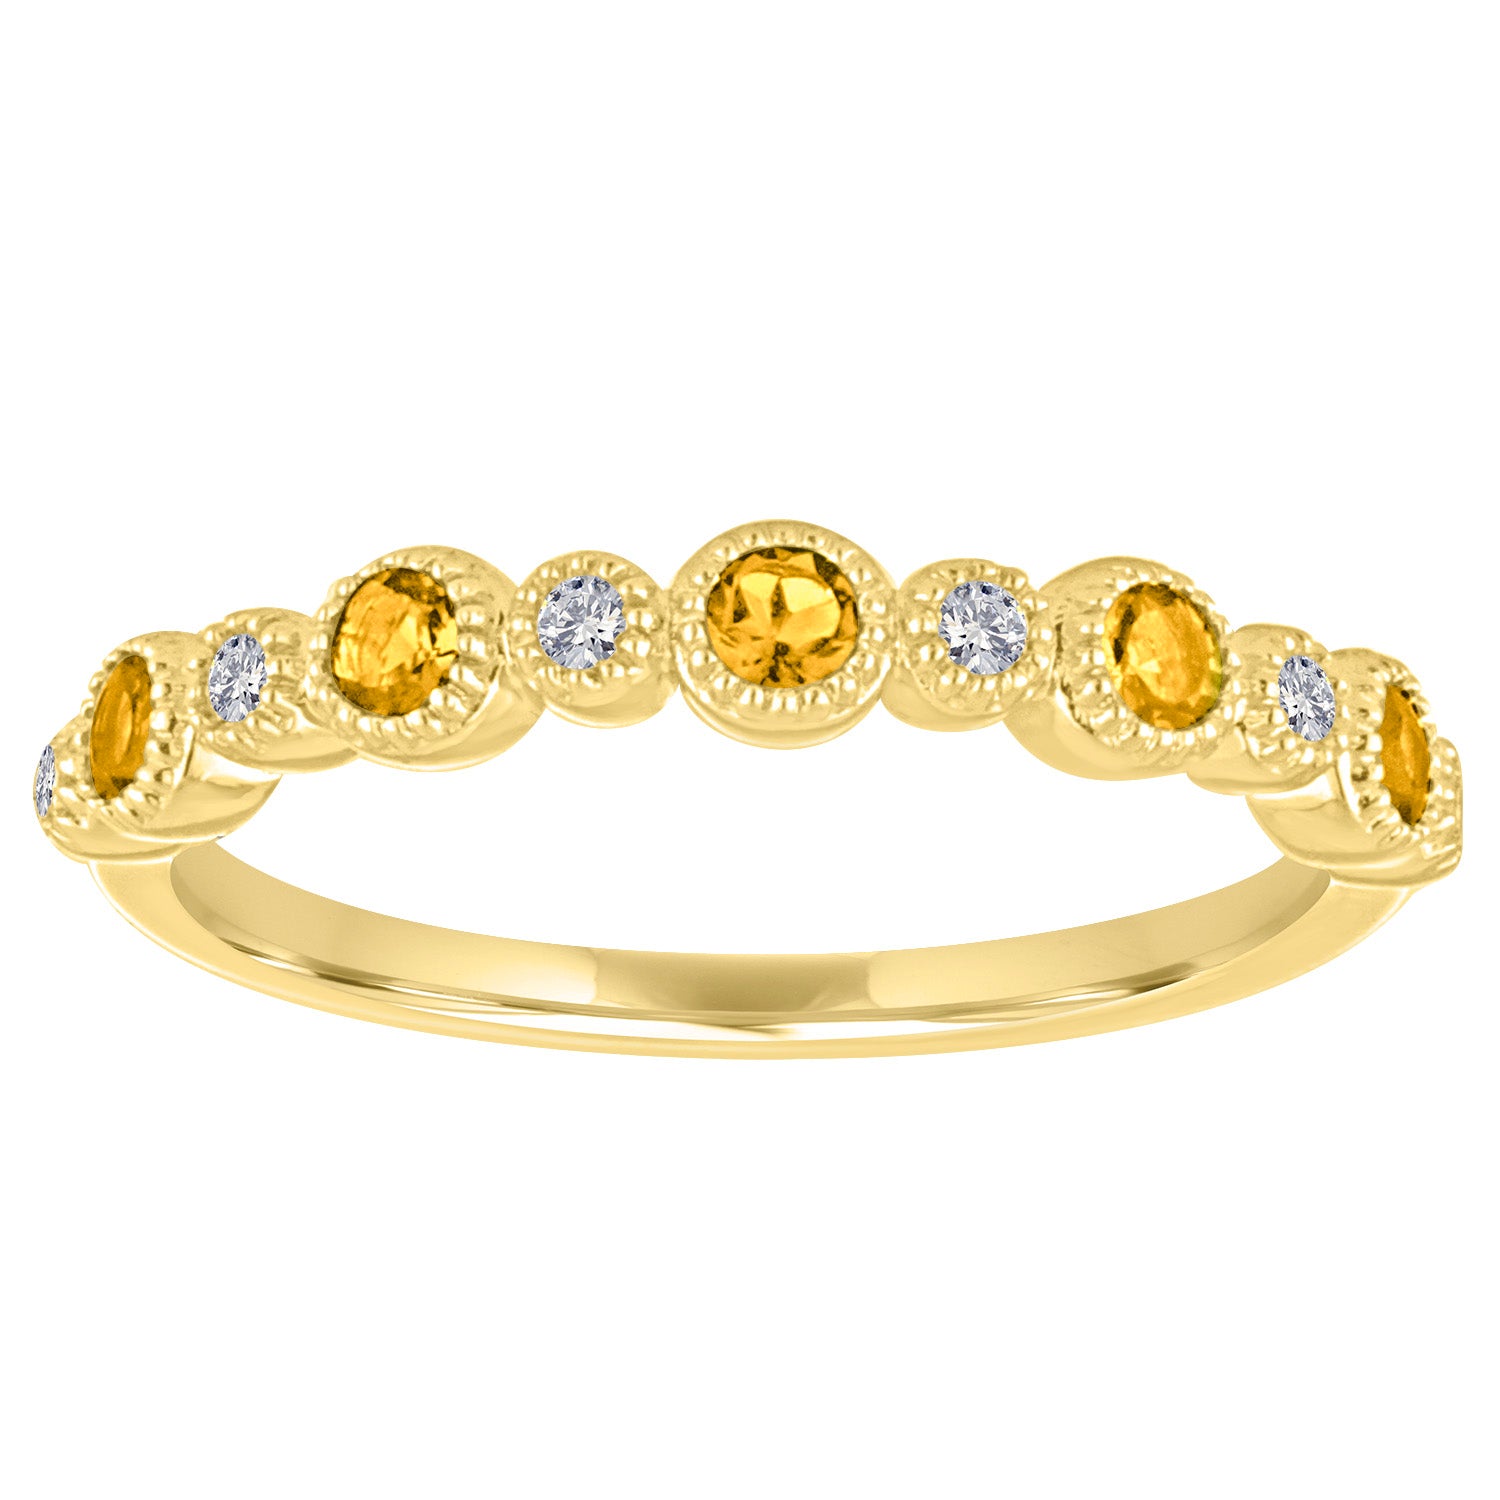 Yellow gold skinny band with large round citrines and small round diamonds. 